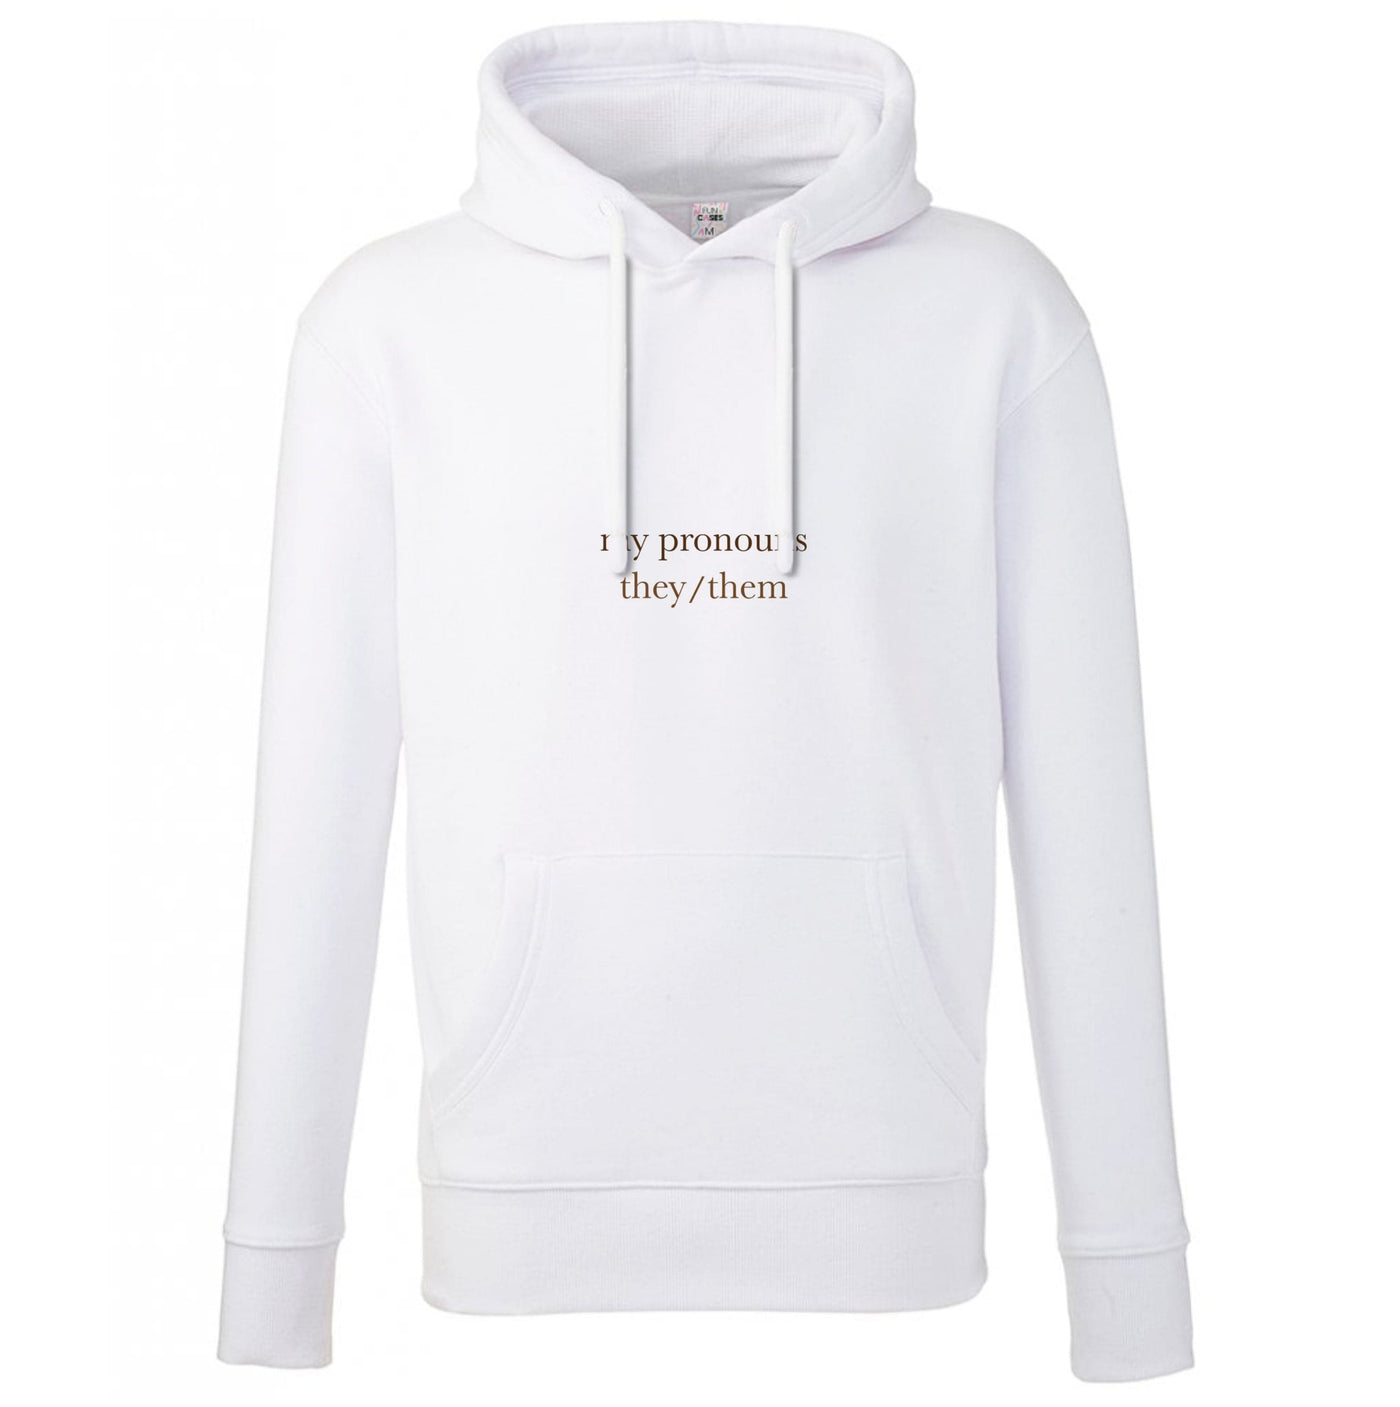 They & Them - Pronouns Hoodie